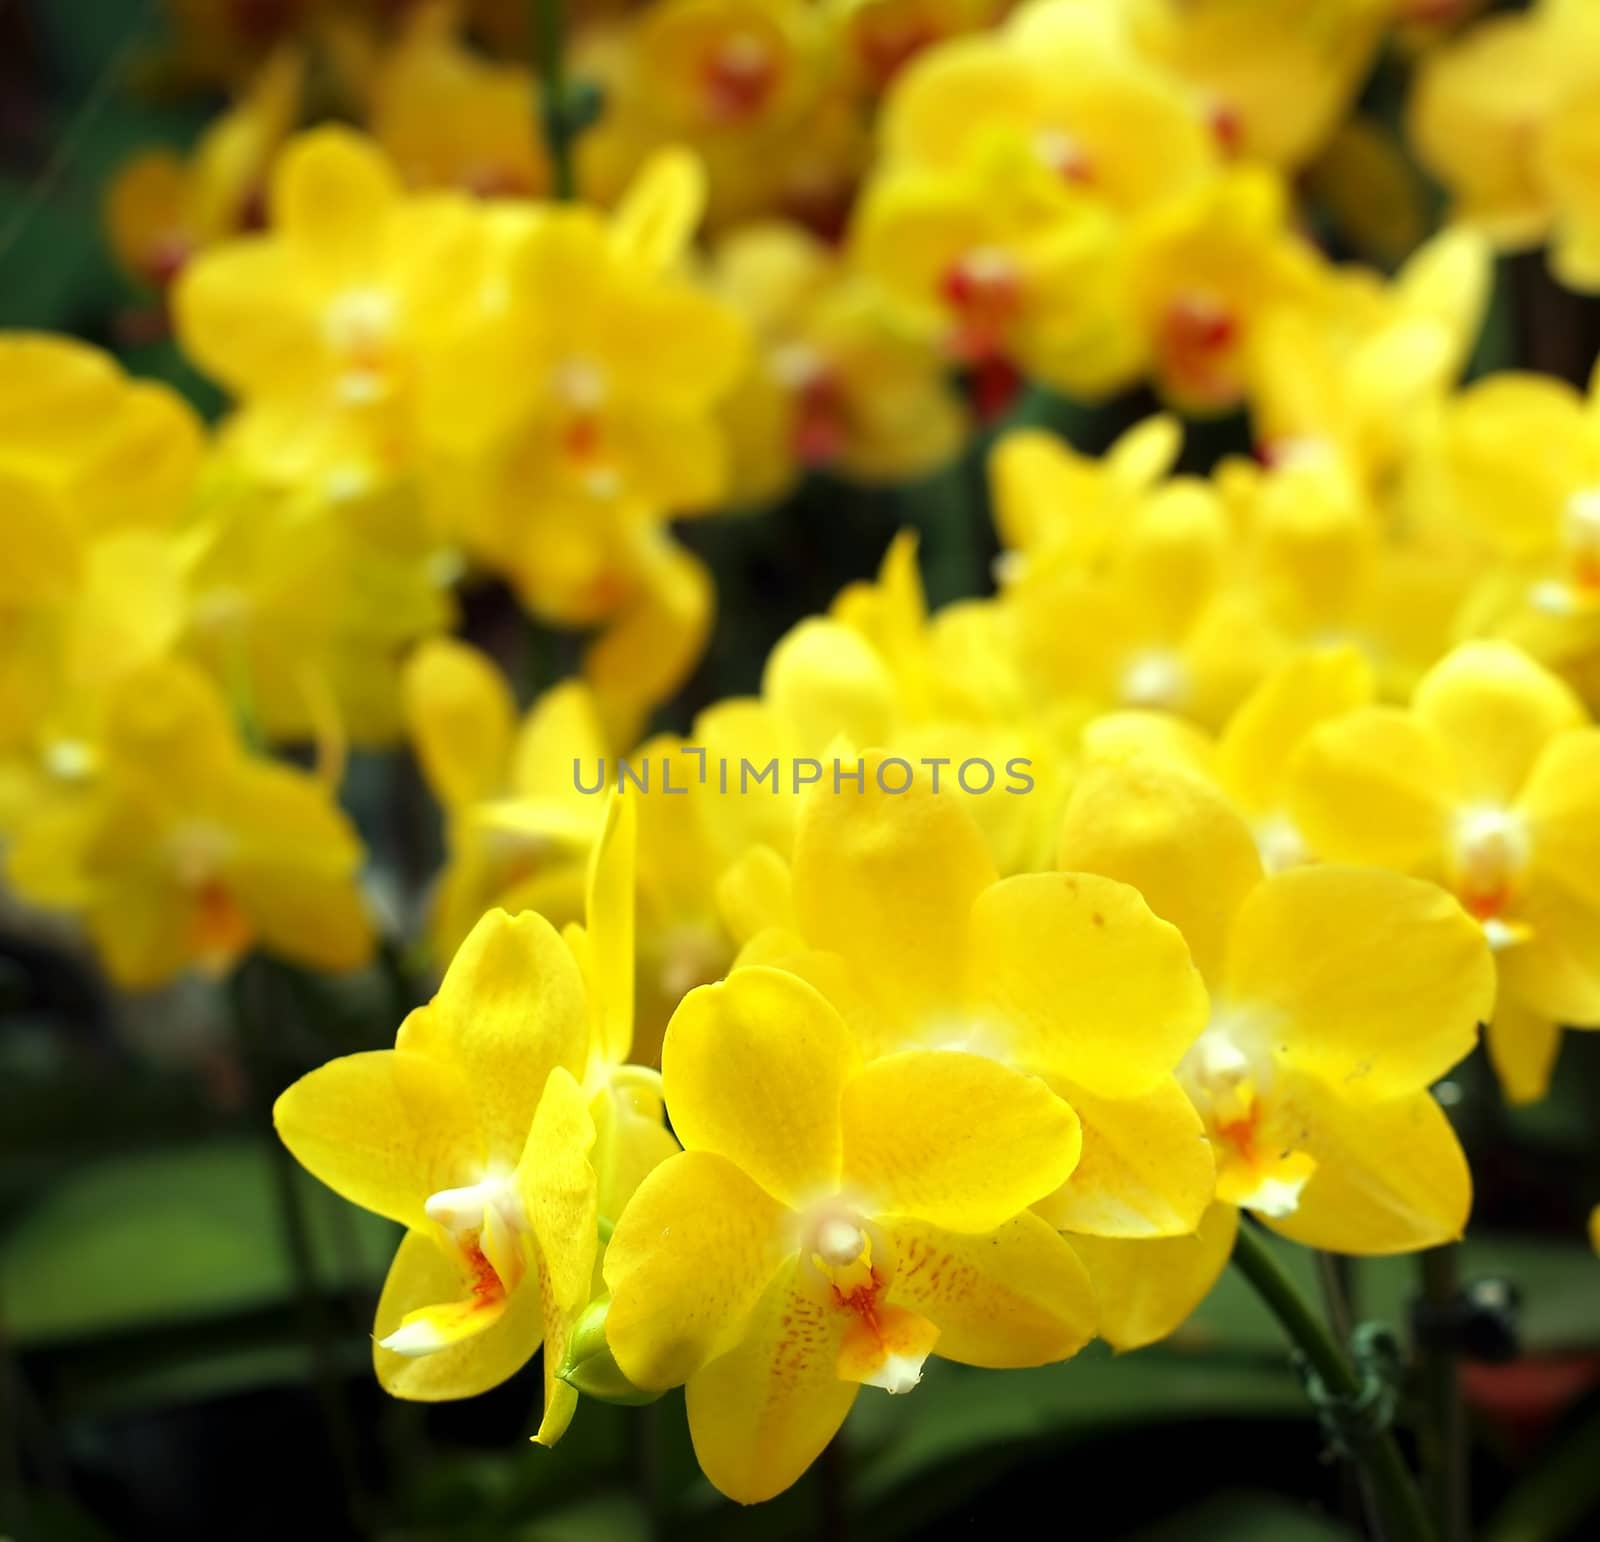 Vibrant yellow blossoms of the Phalaenopsis orchid family
